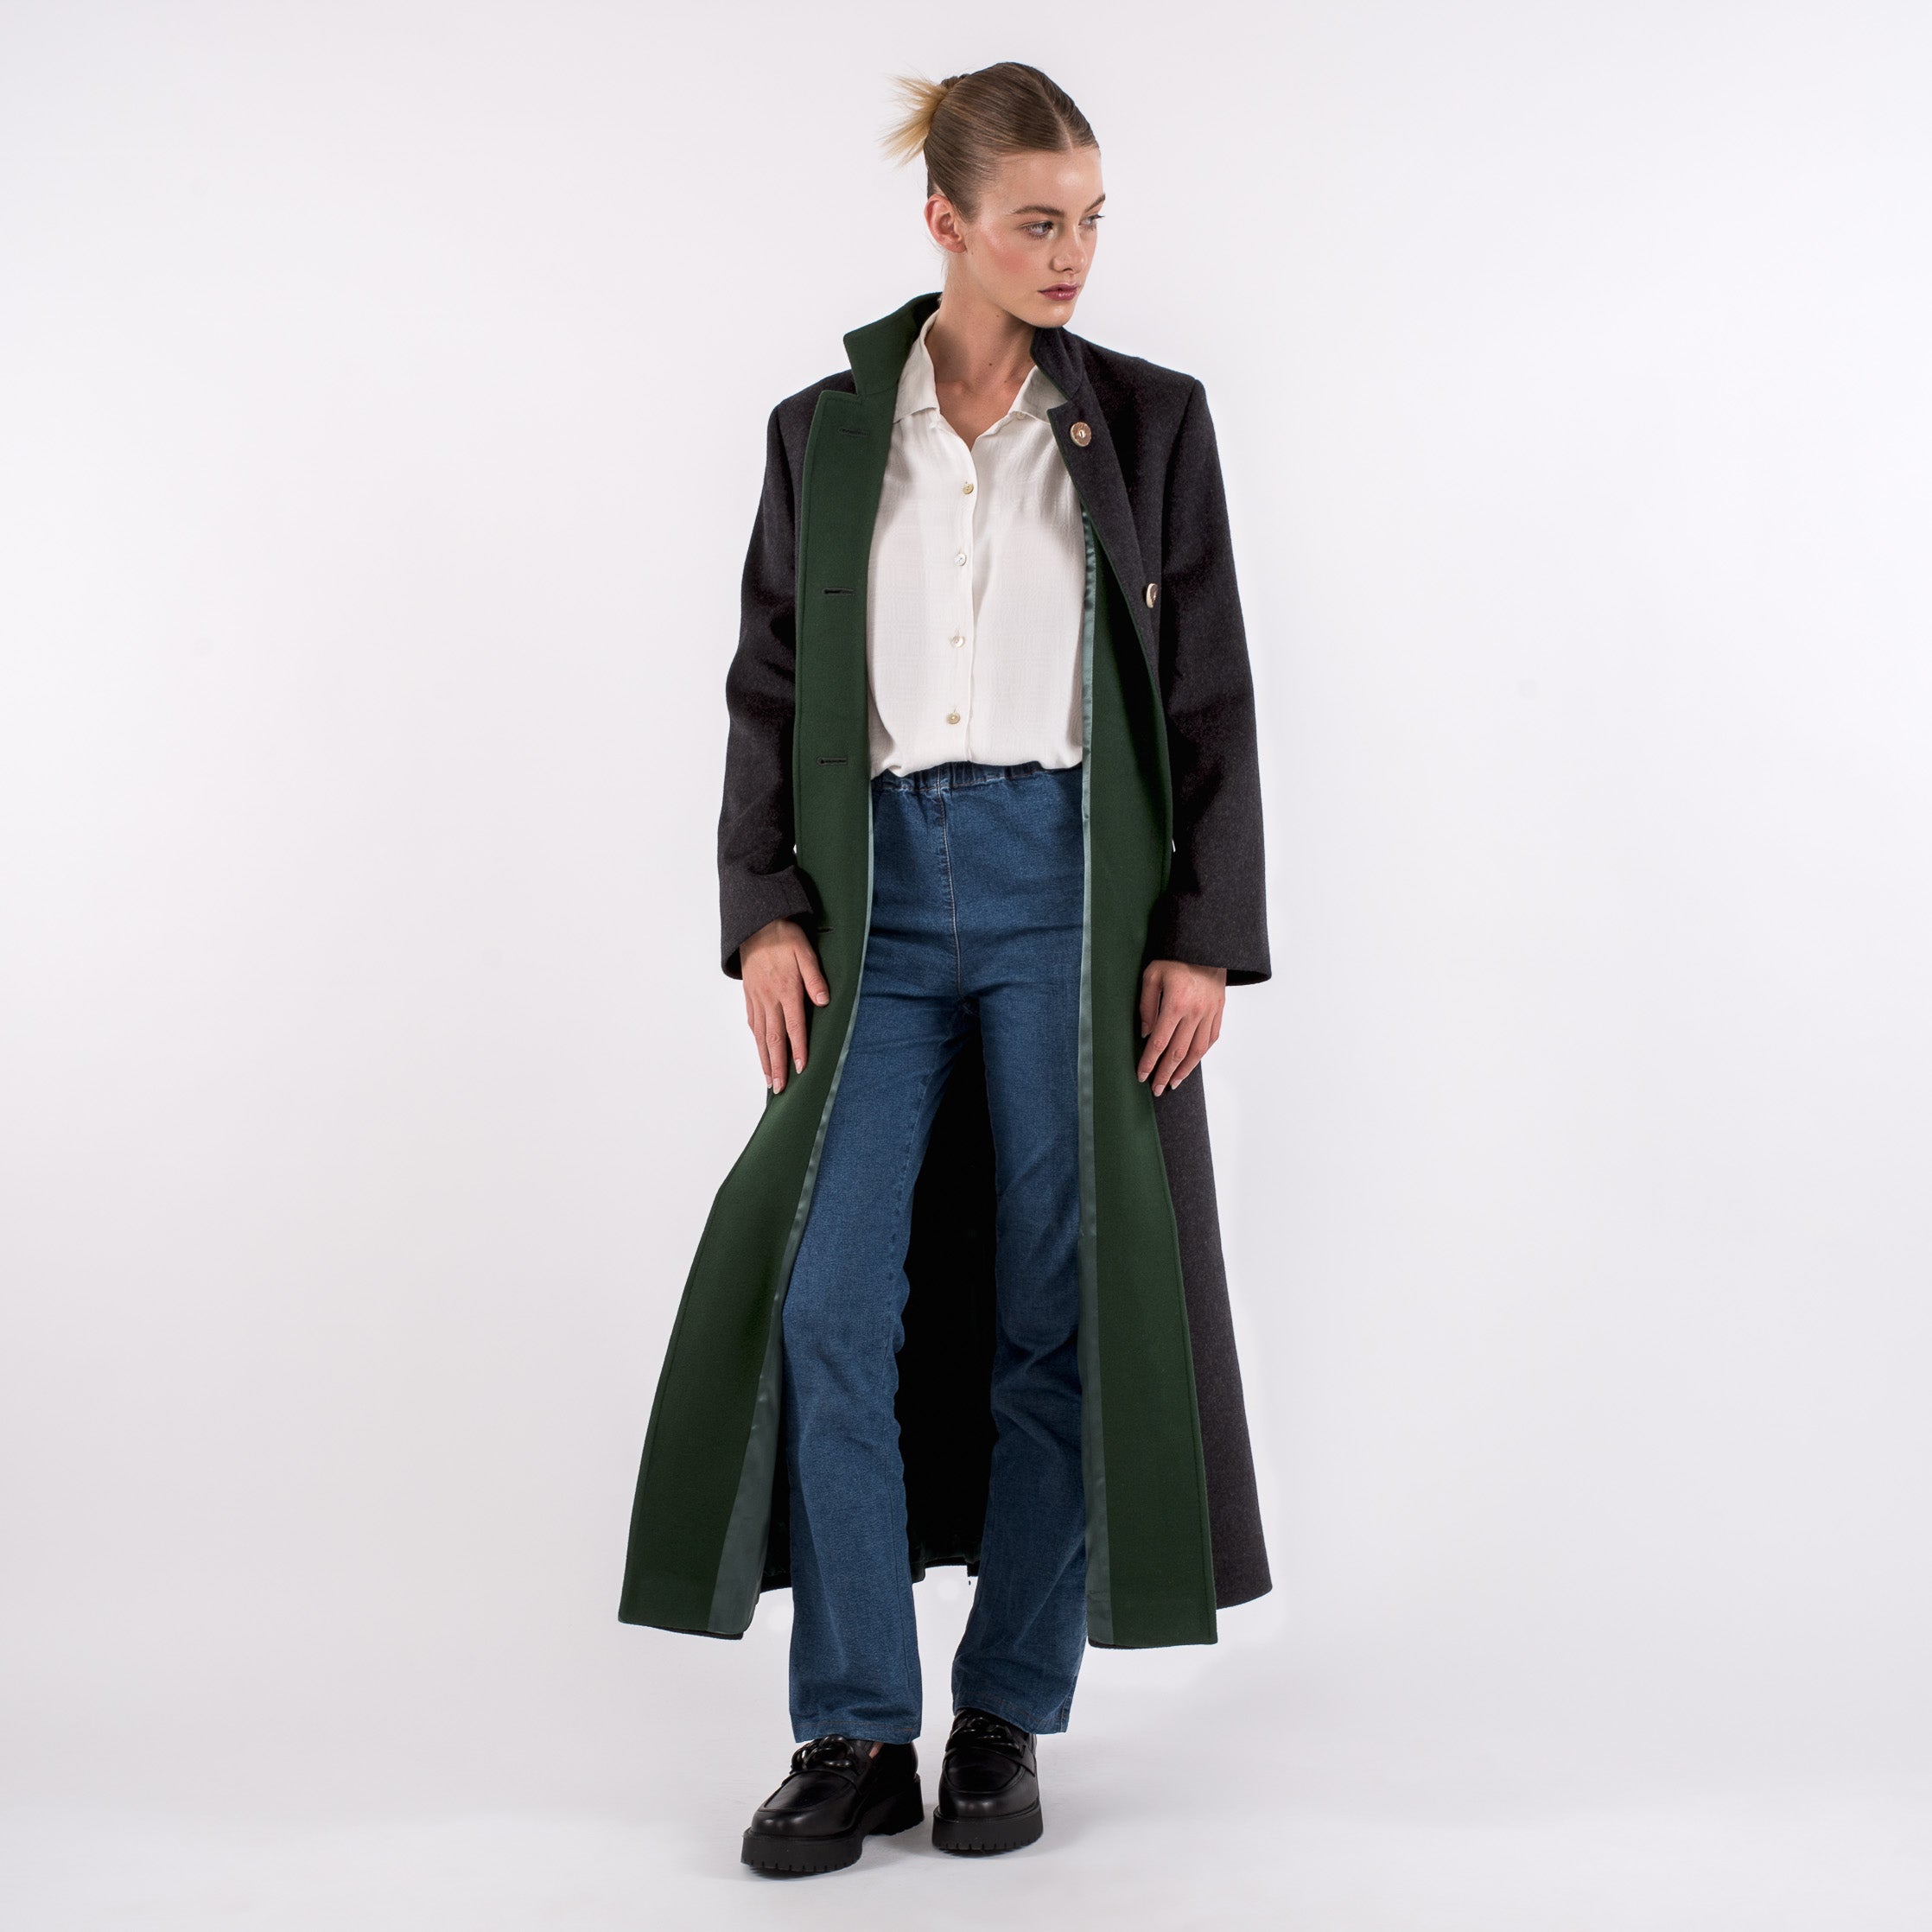 The 5 Best Duster Coats to Dust Those Shoulders Off! (2021)